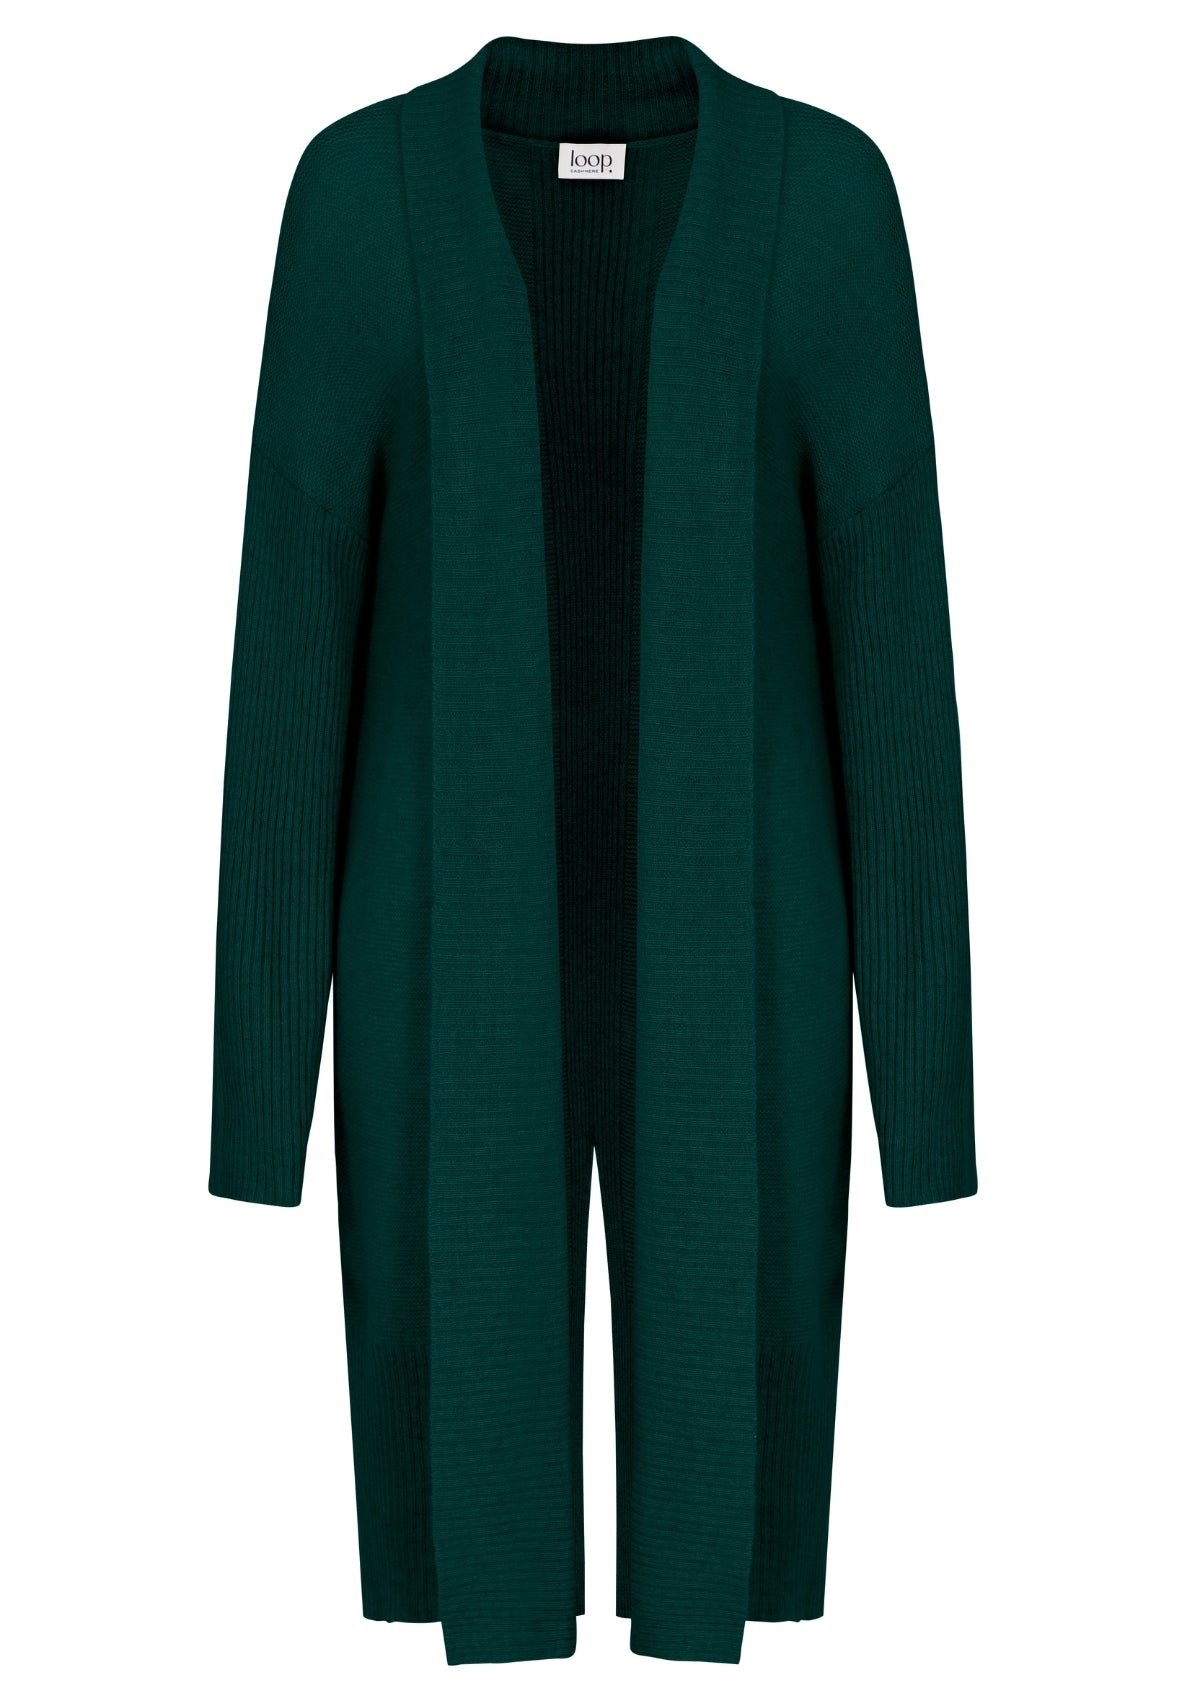 Cashmere Edge To Edge Cardigan in Bottle Green